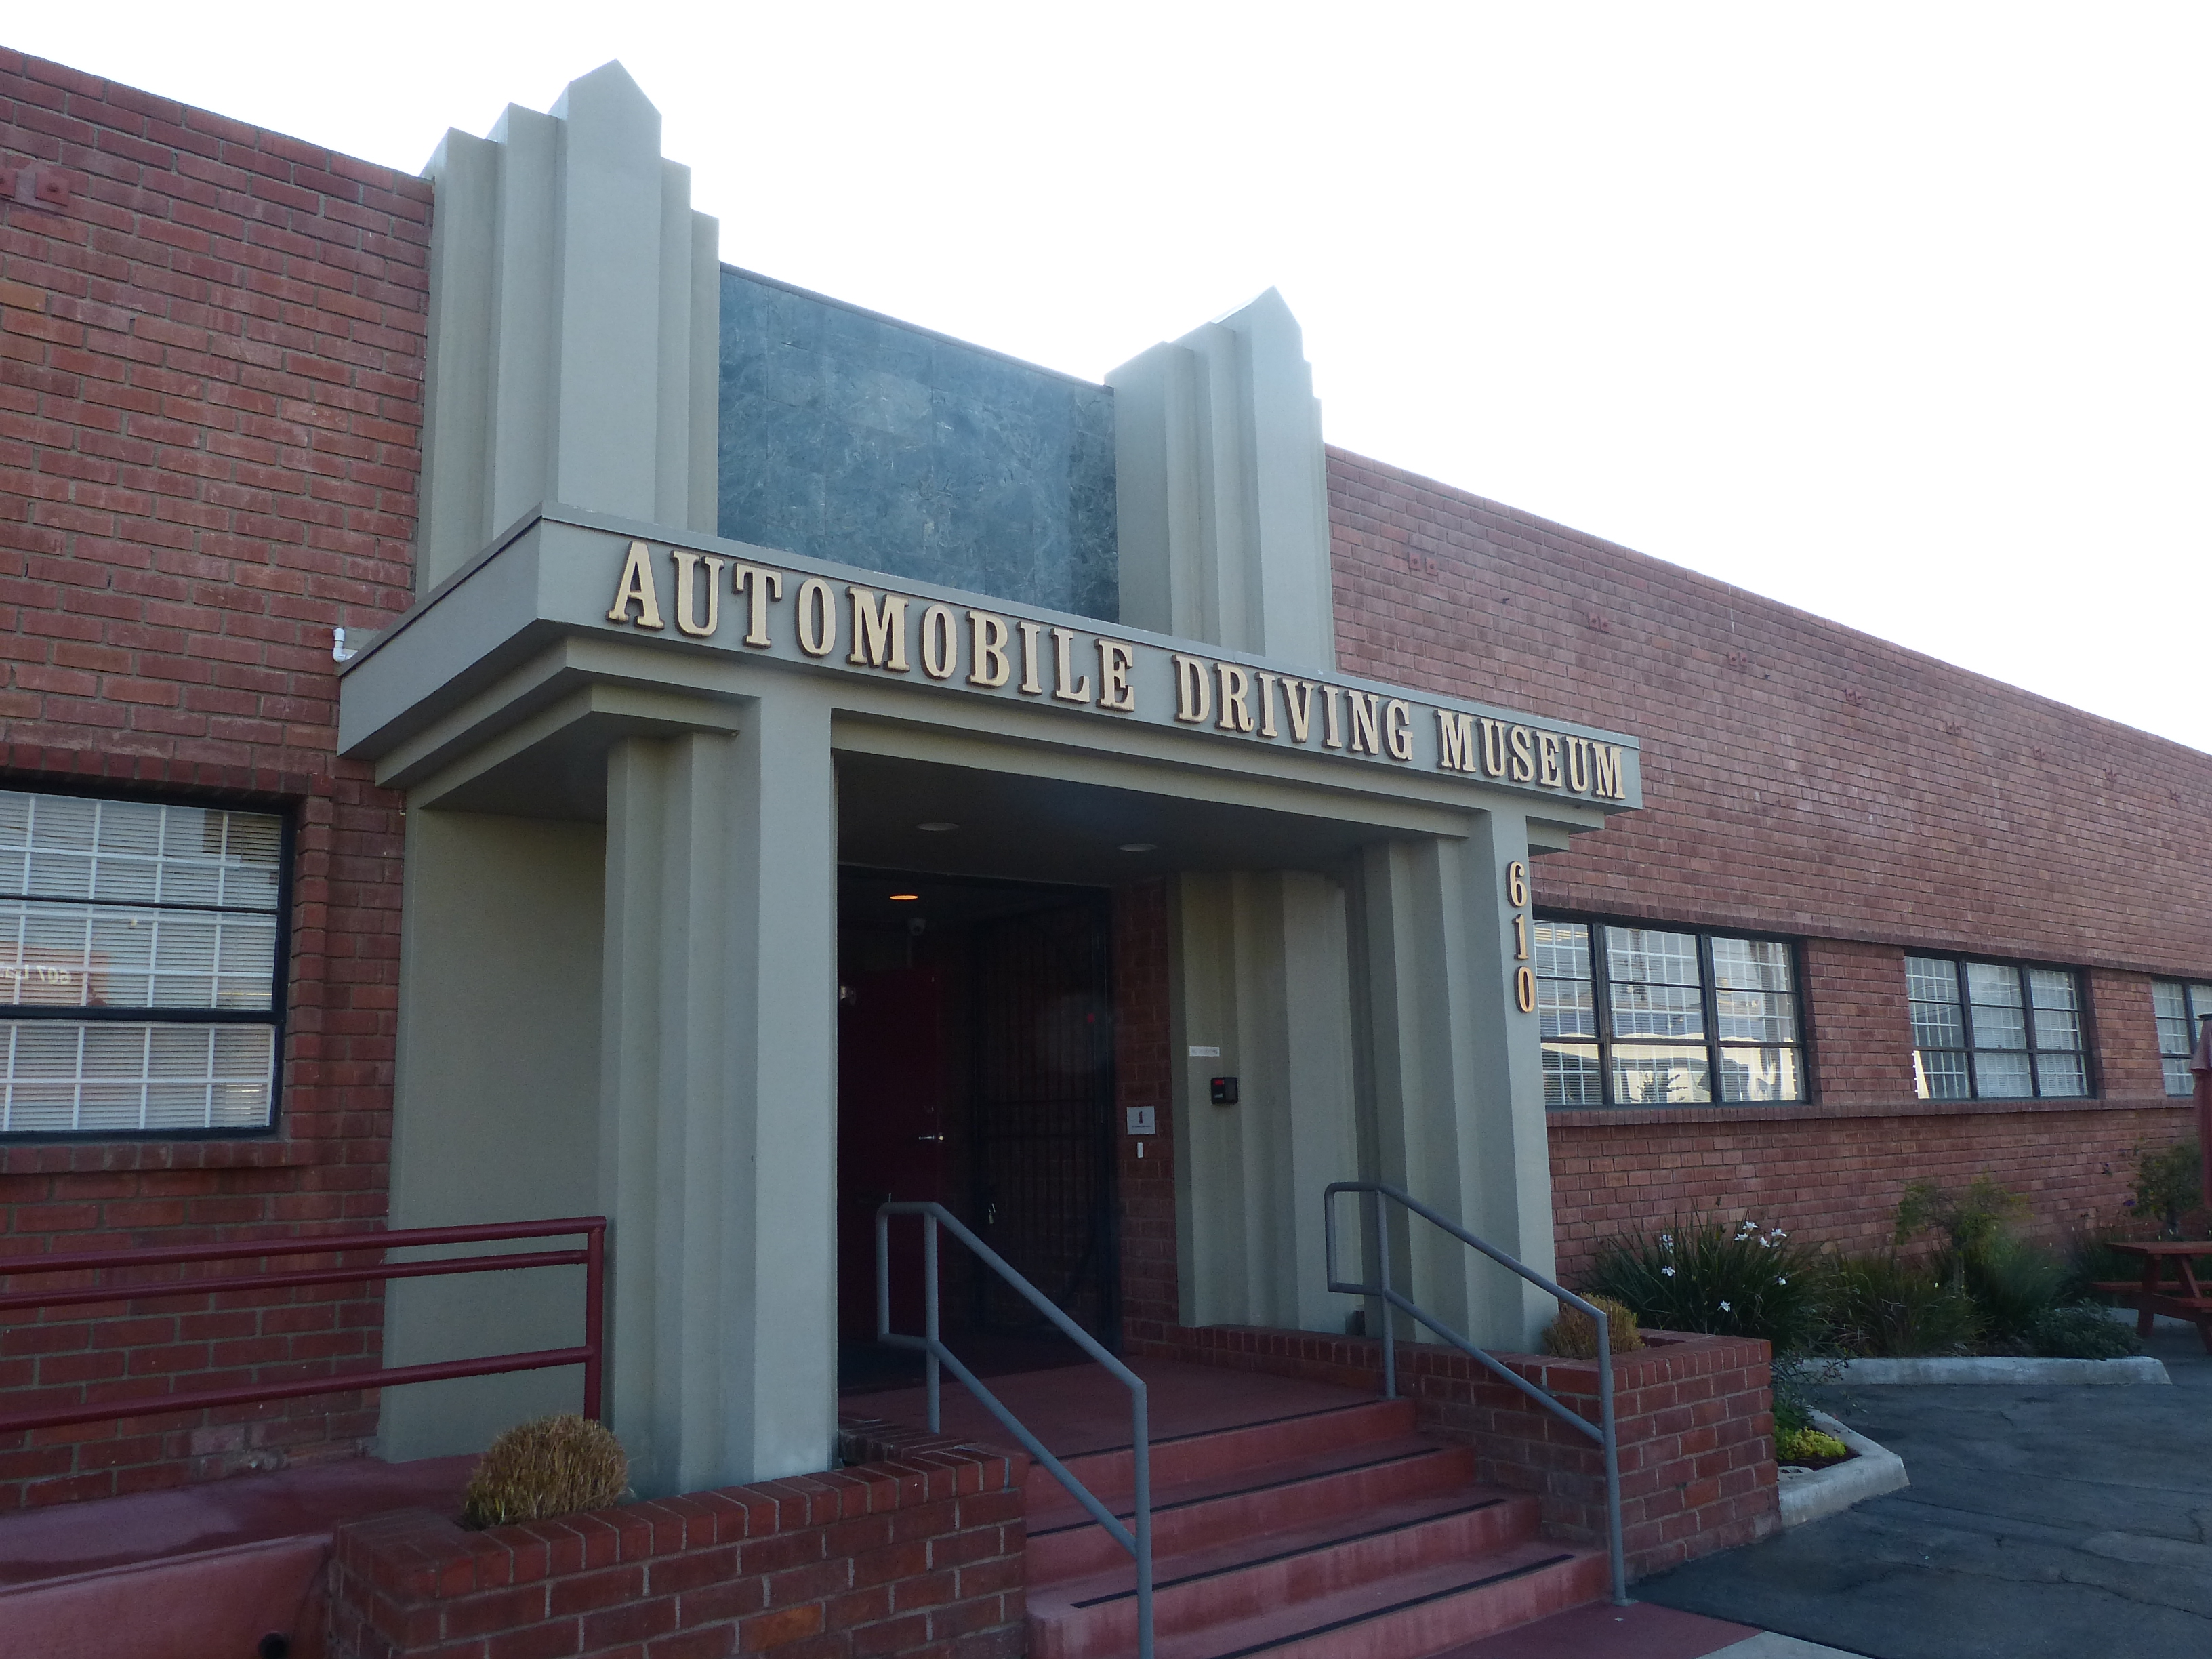 Your New Year’s Resolution: Visit the Automobile Driving Museum in El Segundo, CA